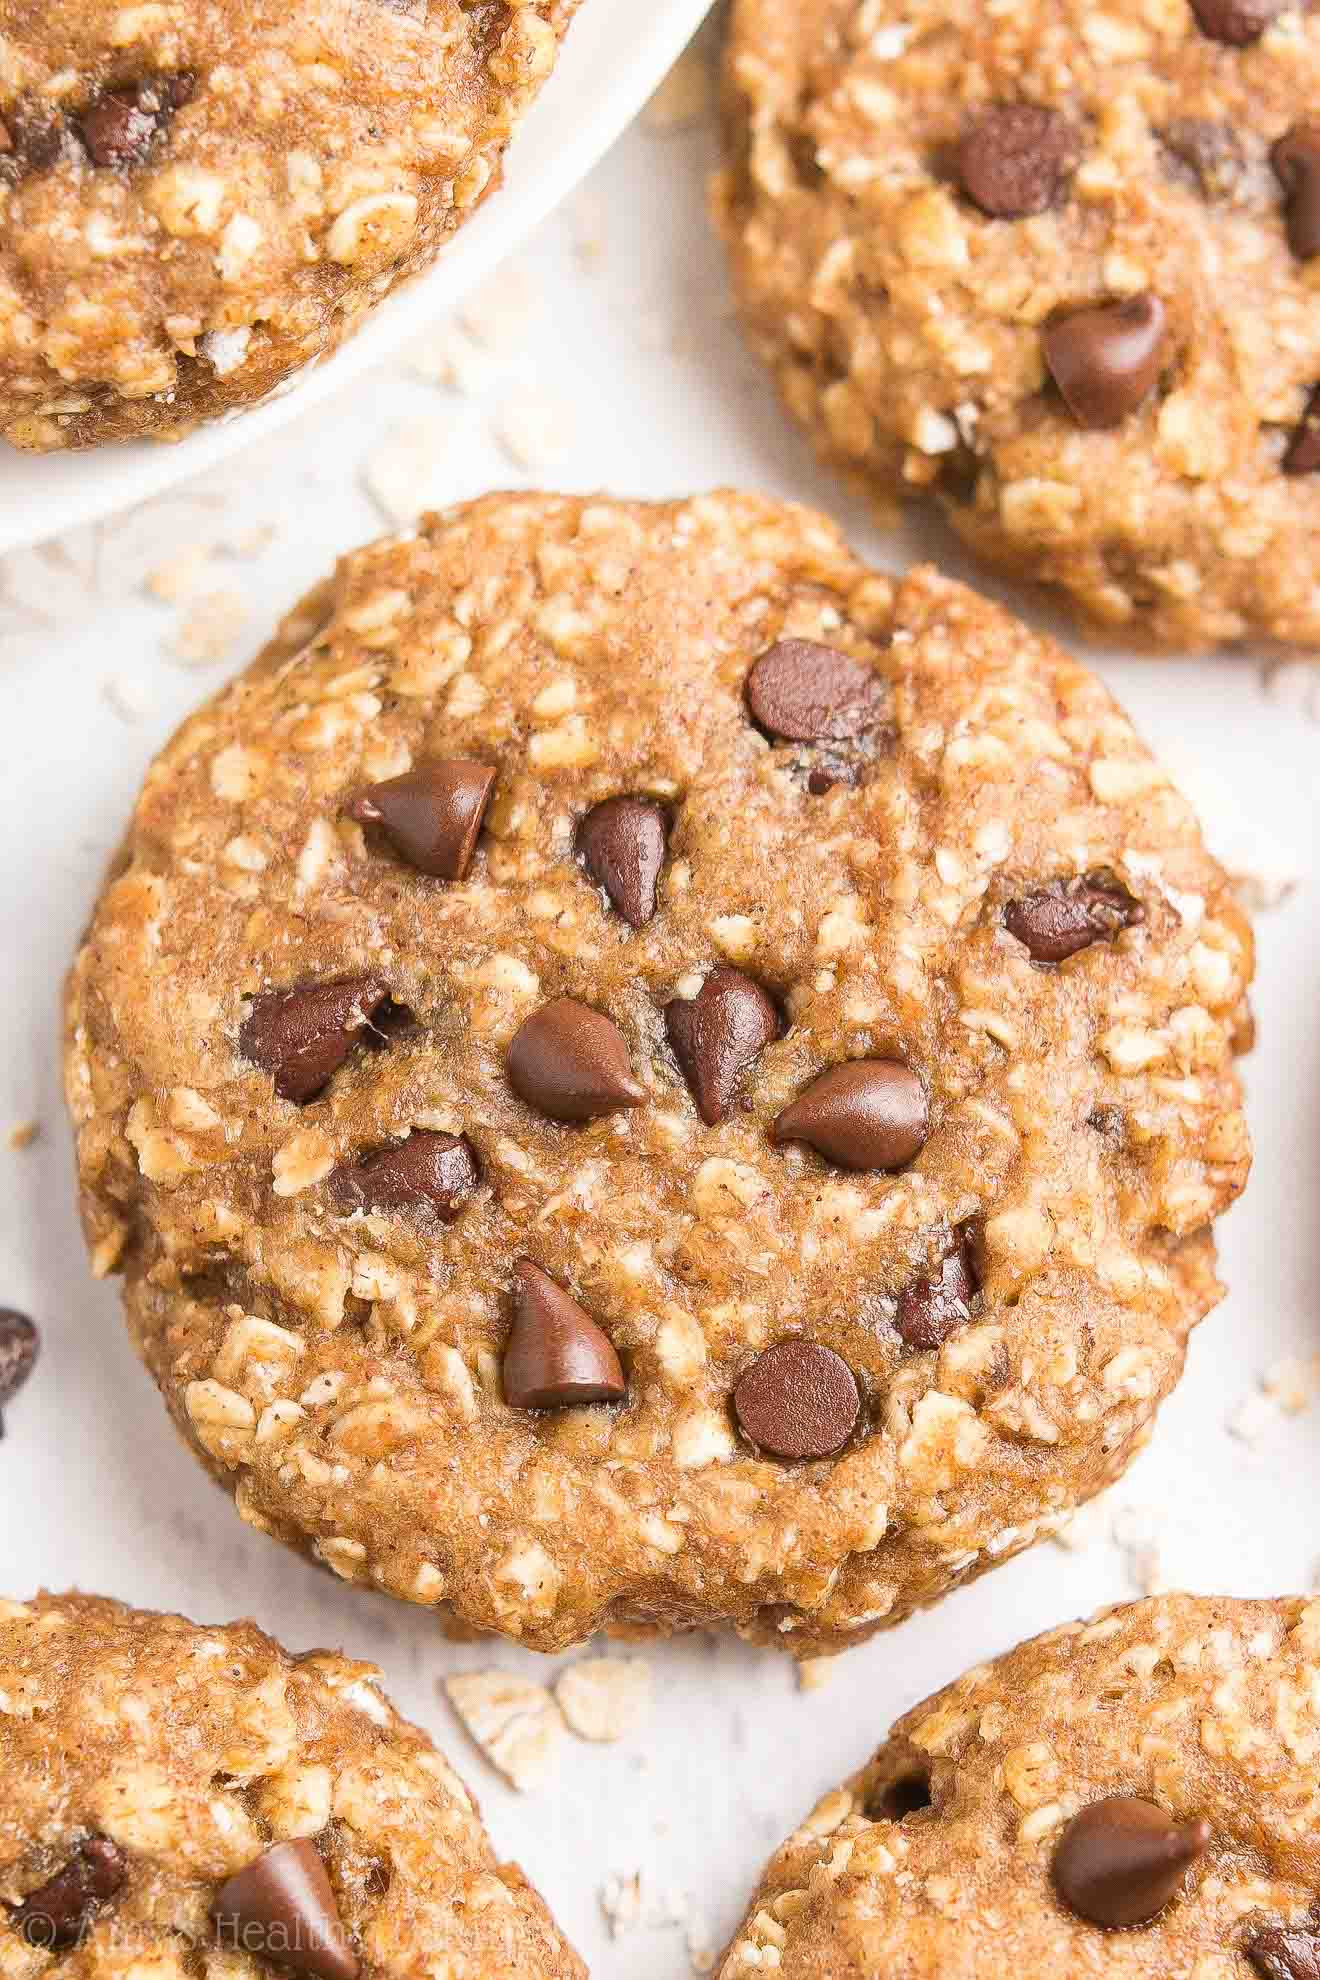 Chocolate Chip Peanut Butter Oatmeal Cookies
 Healthy Chocolate Chip Peanut Butter Oatmeal Breakfast